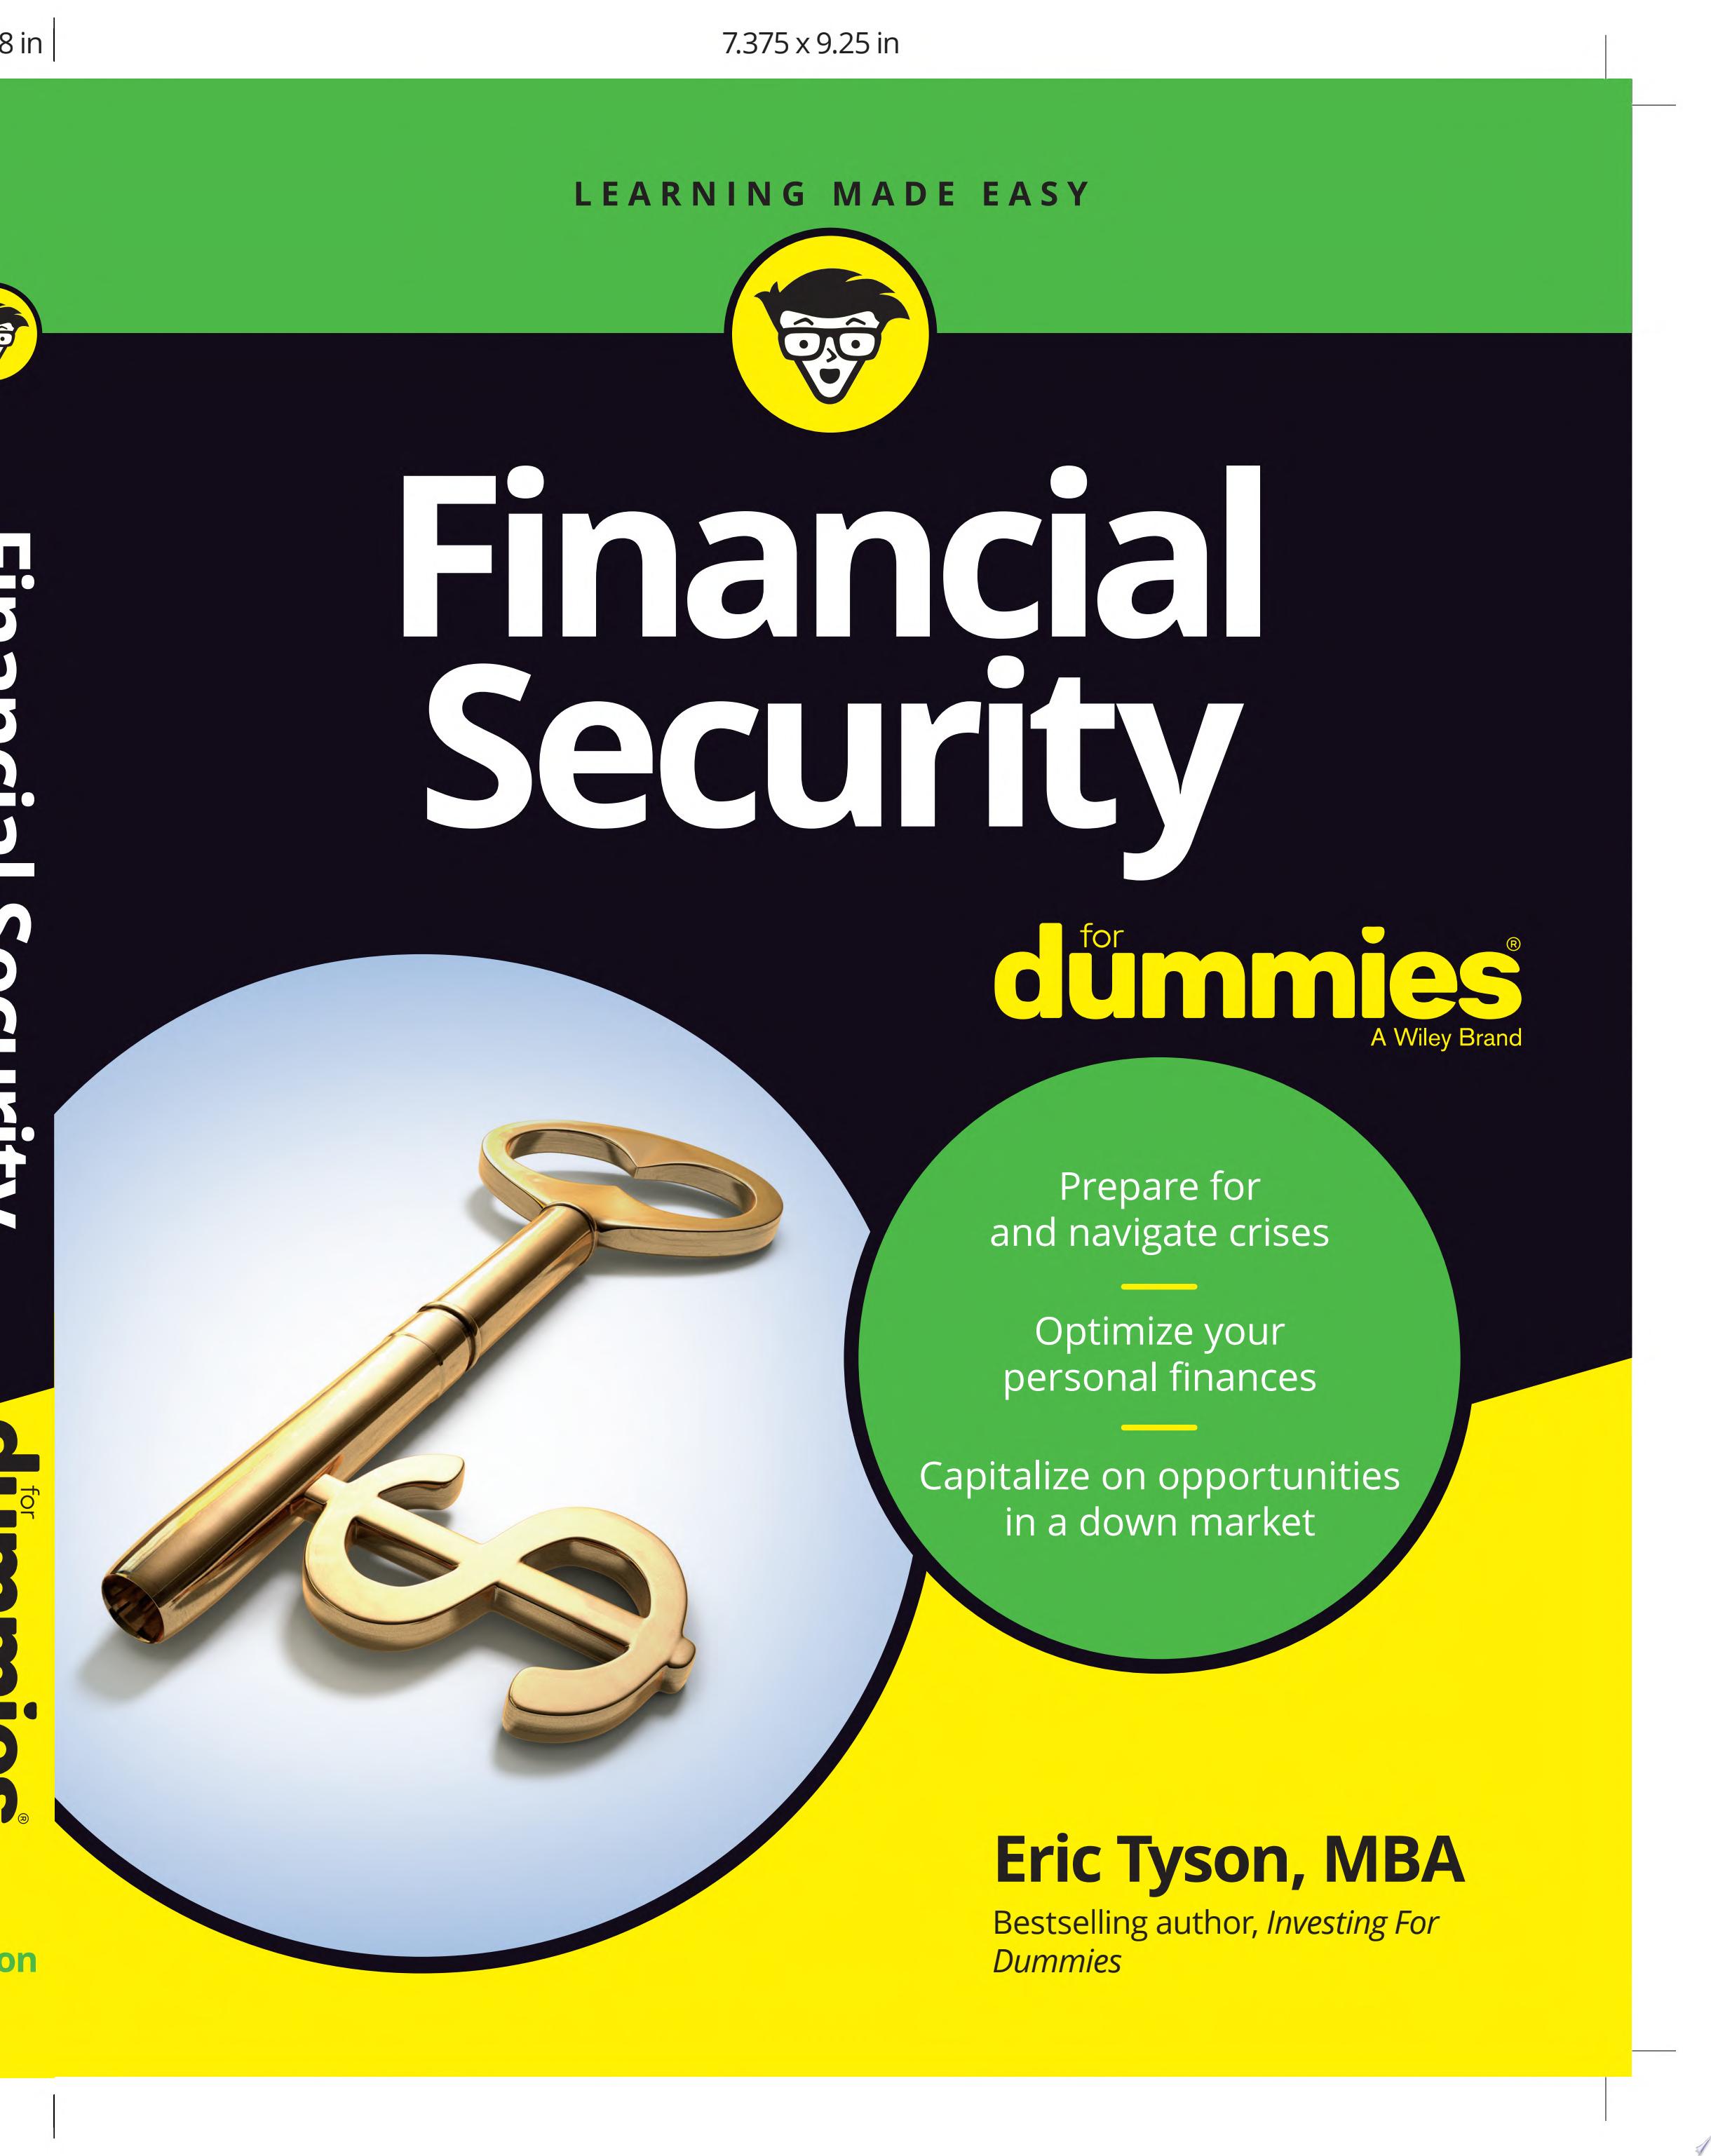 Image for "Financial Security For Dummies"